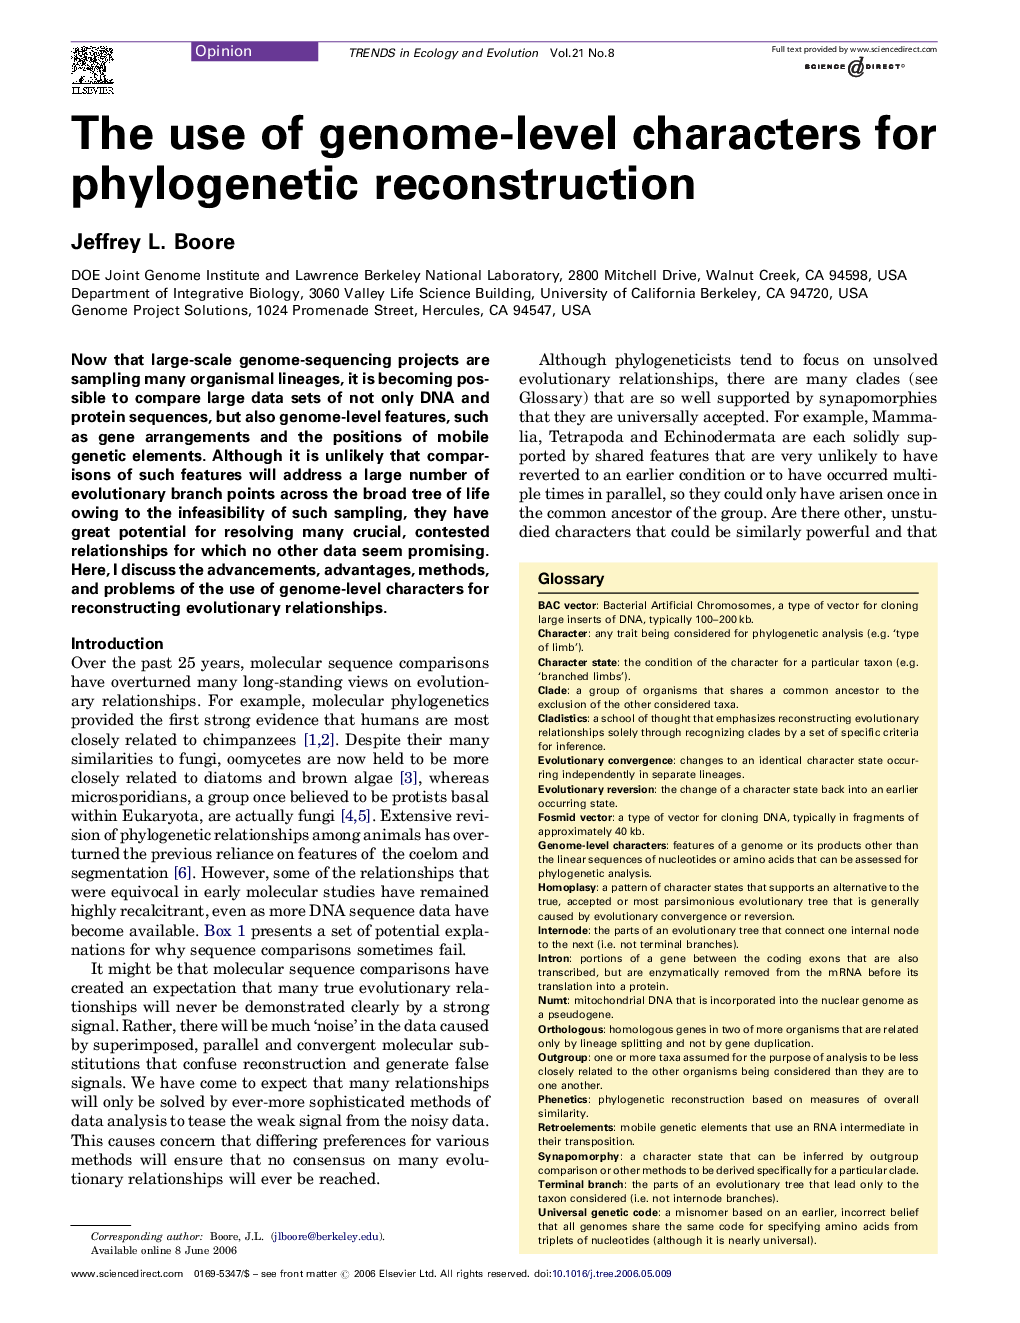 The use of genome-level characters for phylogenetic reconstruction